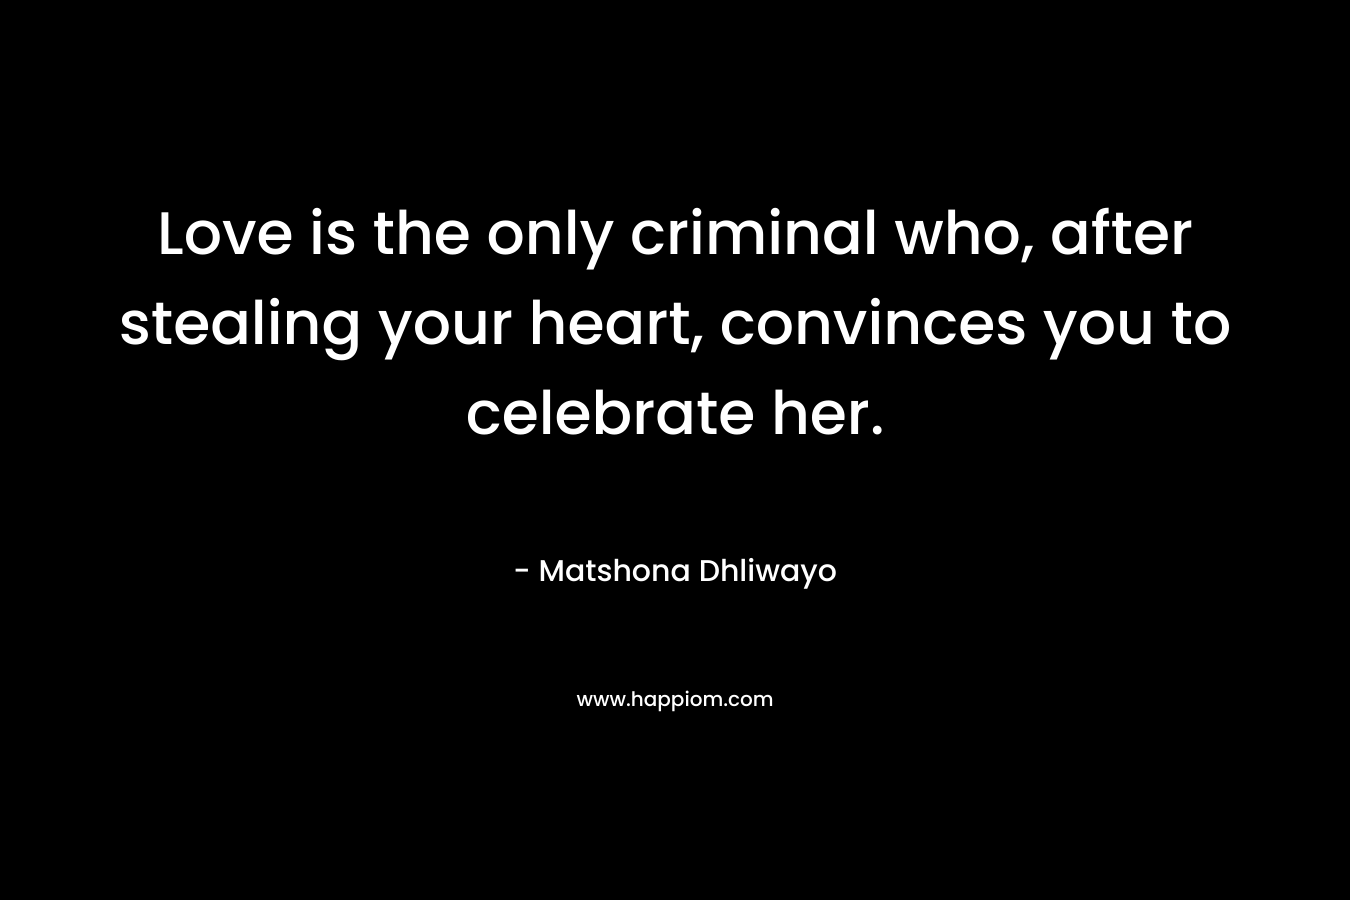 Love is the only criminal who, after stealing your heart, convinces you to celebrate her. – Matshona Dhliwayo